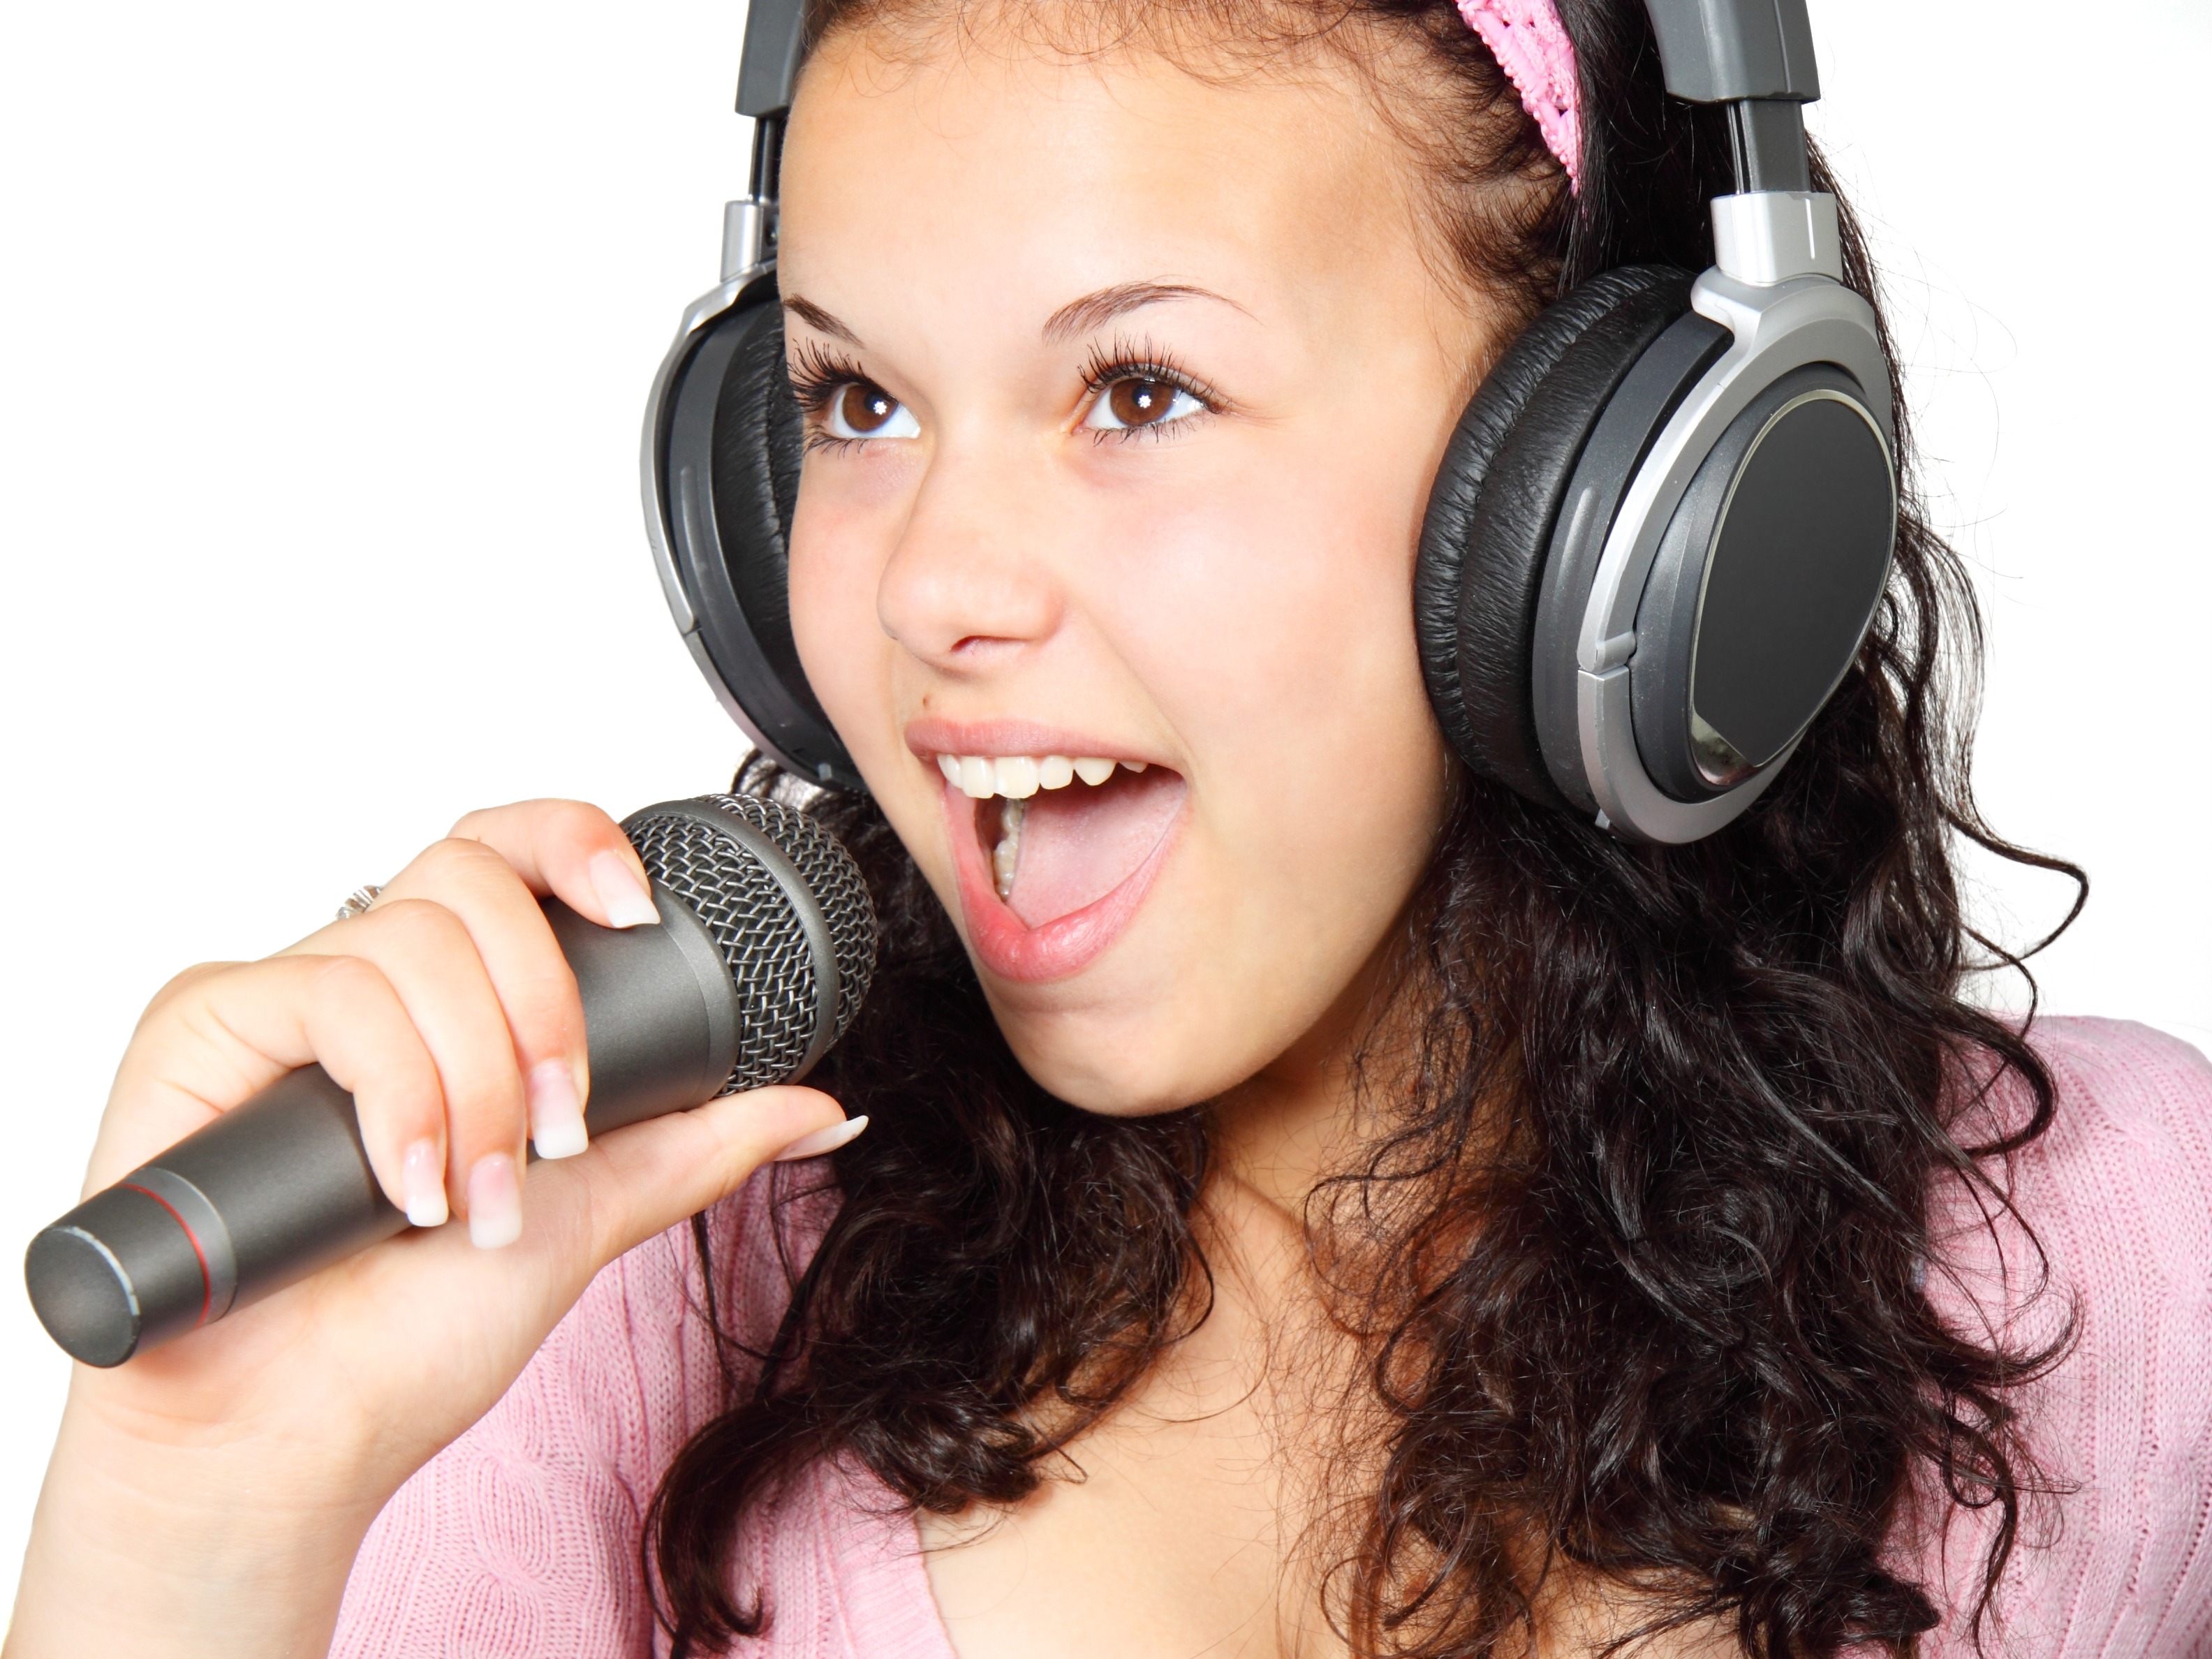 A Girl Holding a Microphone With a Headphone · Free